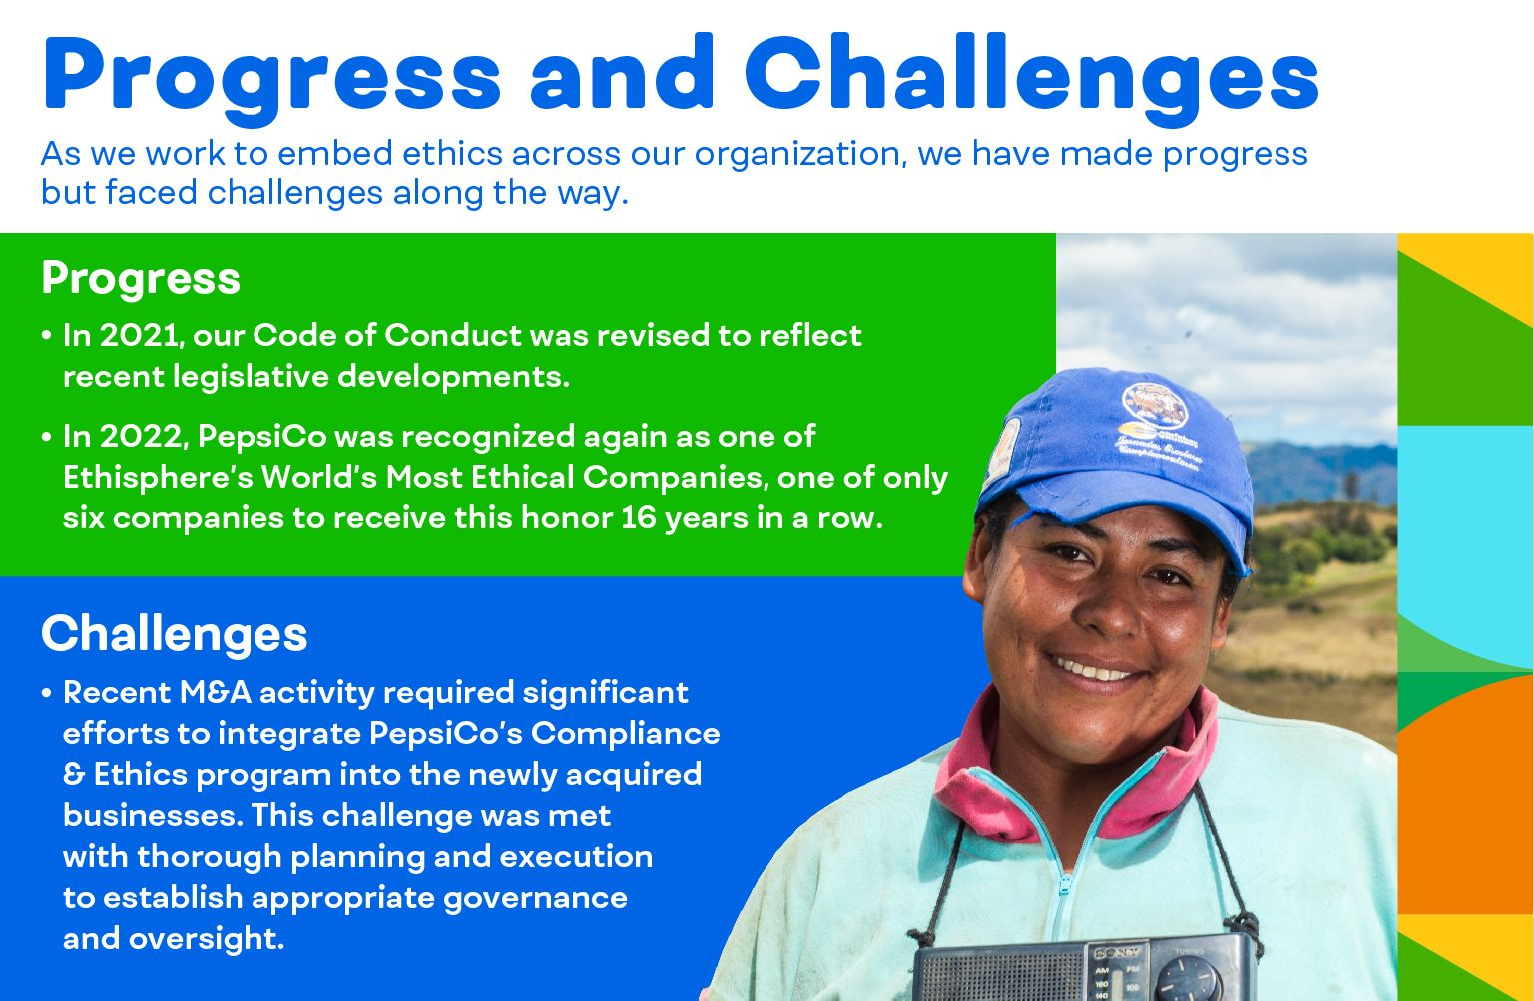 Progress and Challenges: As we work to embed ethics across our organization, we have made progress but faced challenges along the way.